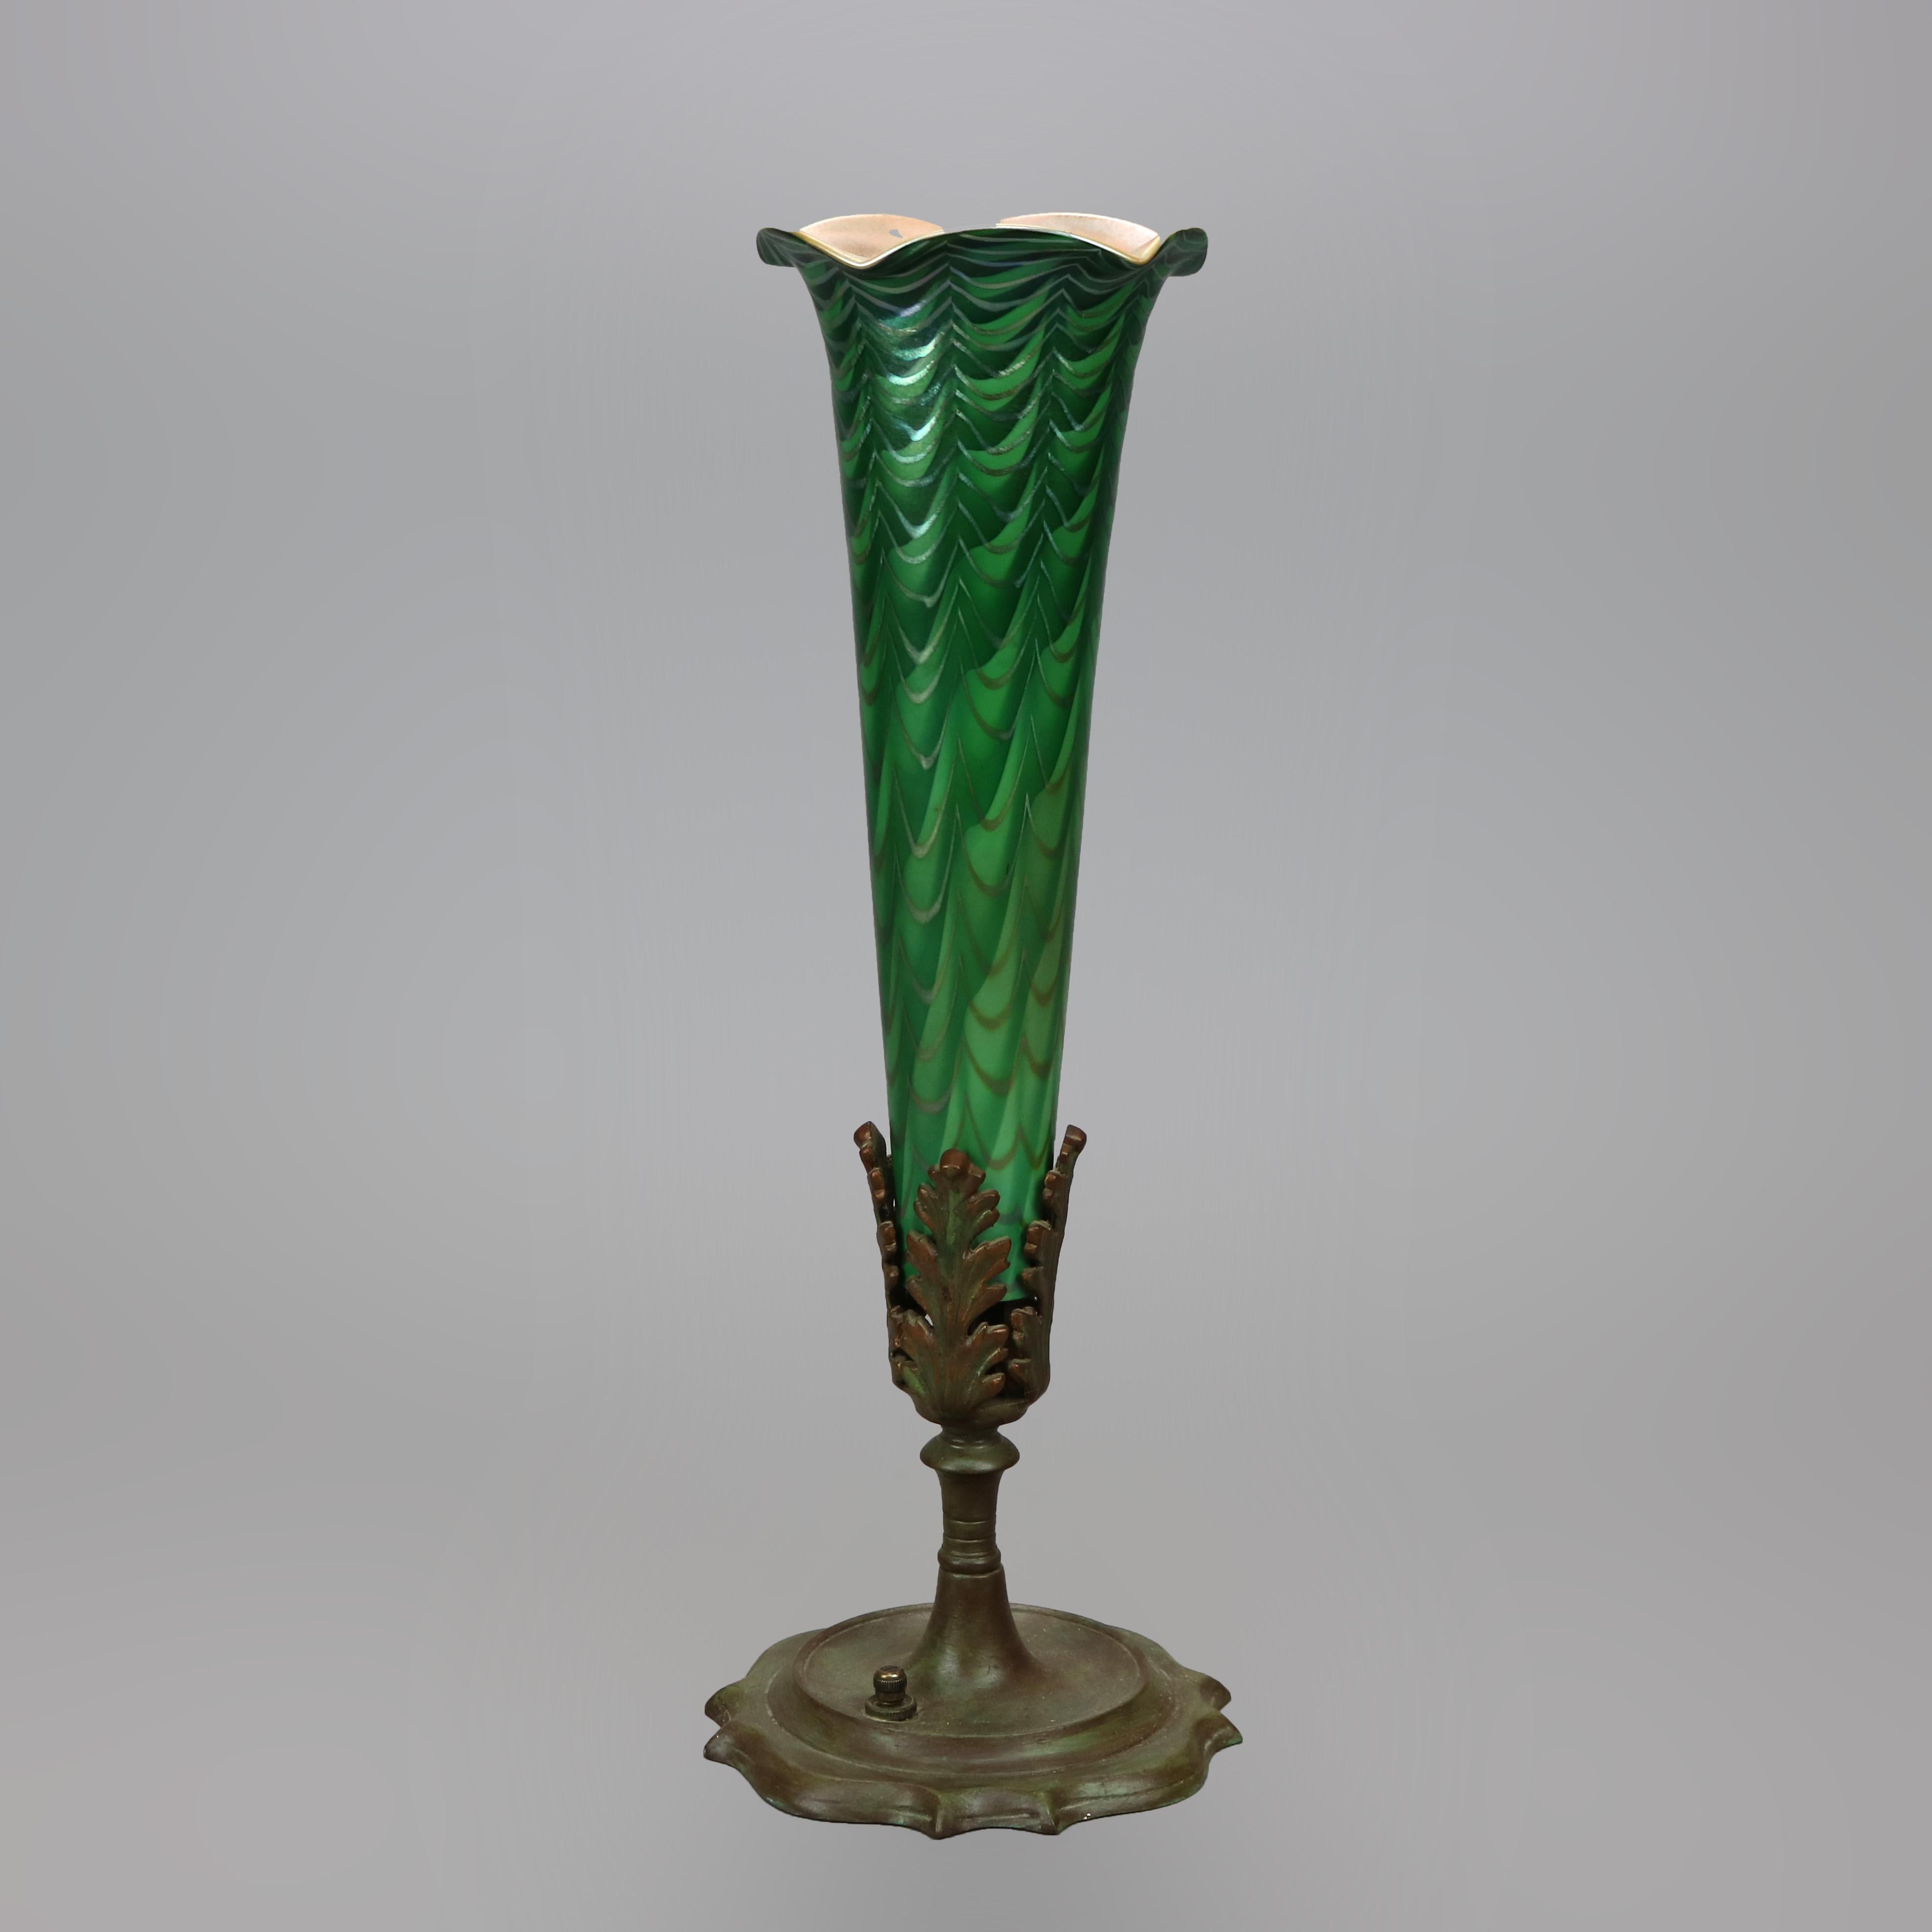 An Arts and Crafts table lamp by Durand offers flower form with flared art glass shade having green over marigold with ruffled rim, electrified and accommodates a 15w tube bulb, working, unsigned, c1930

Measures- 15.25''h x 5.25''w x